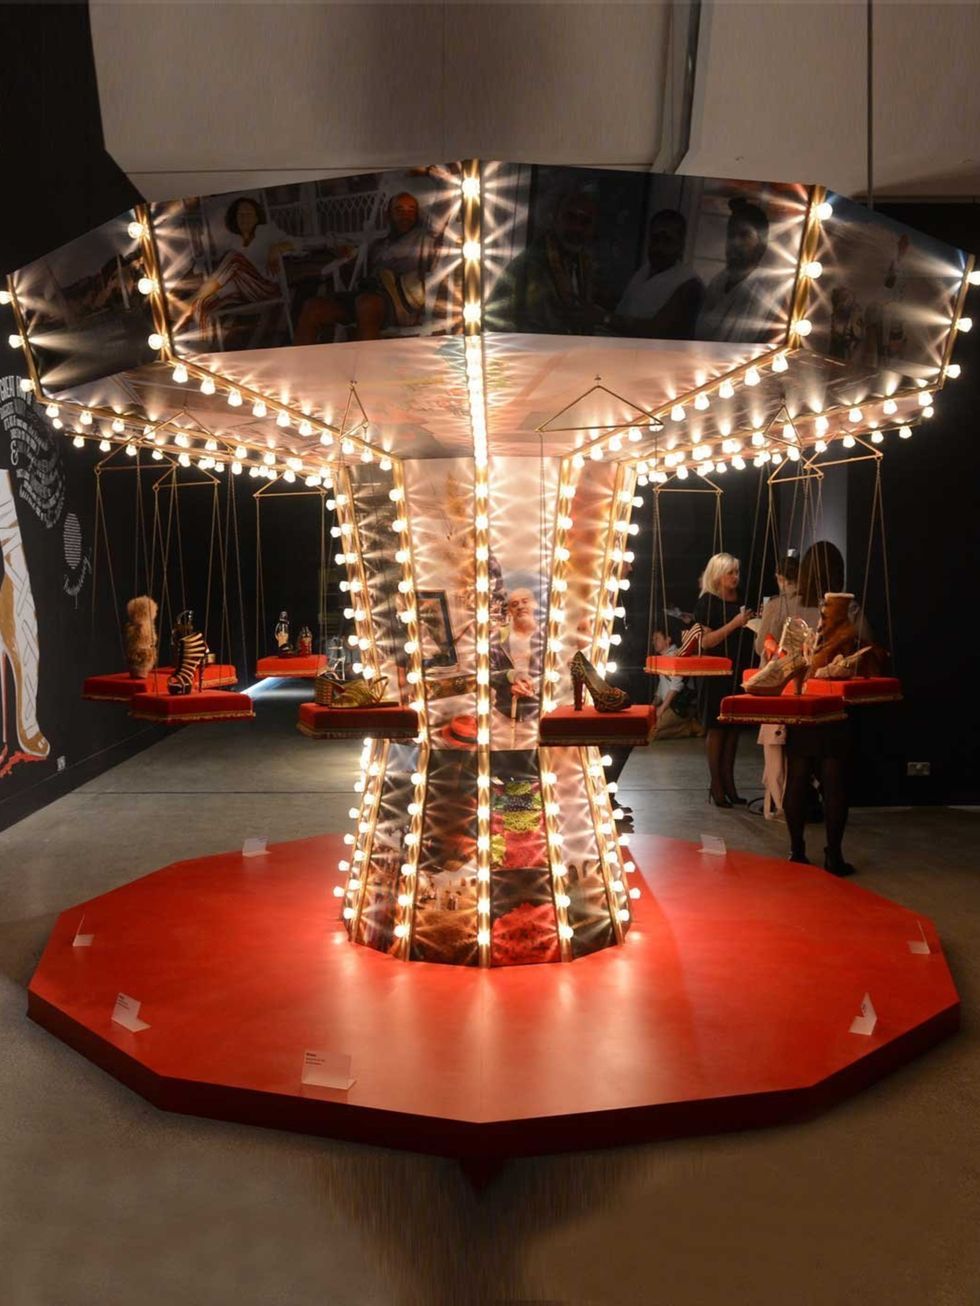 <p>The carousel display at the Louboutin exhibition</p>